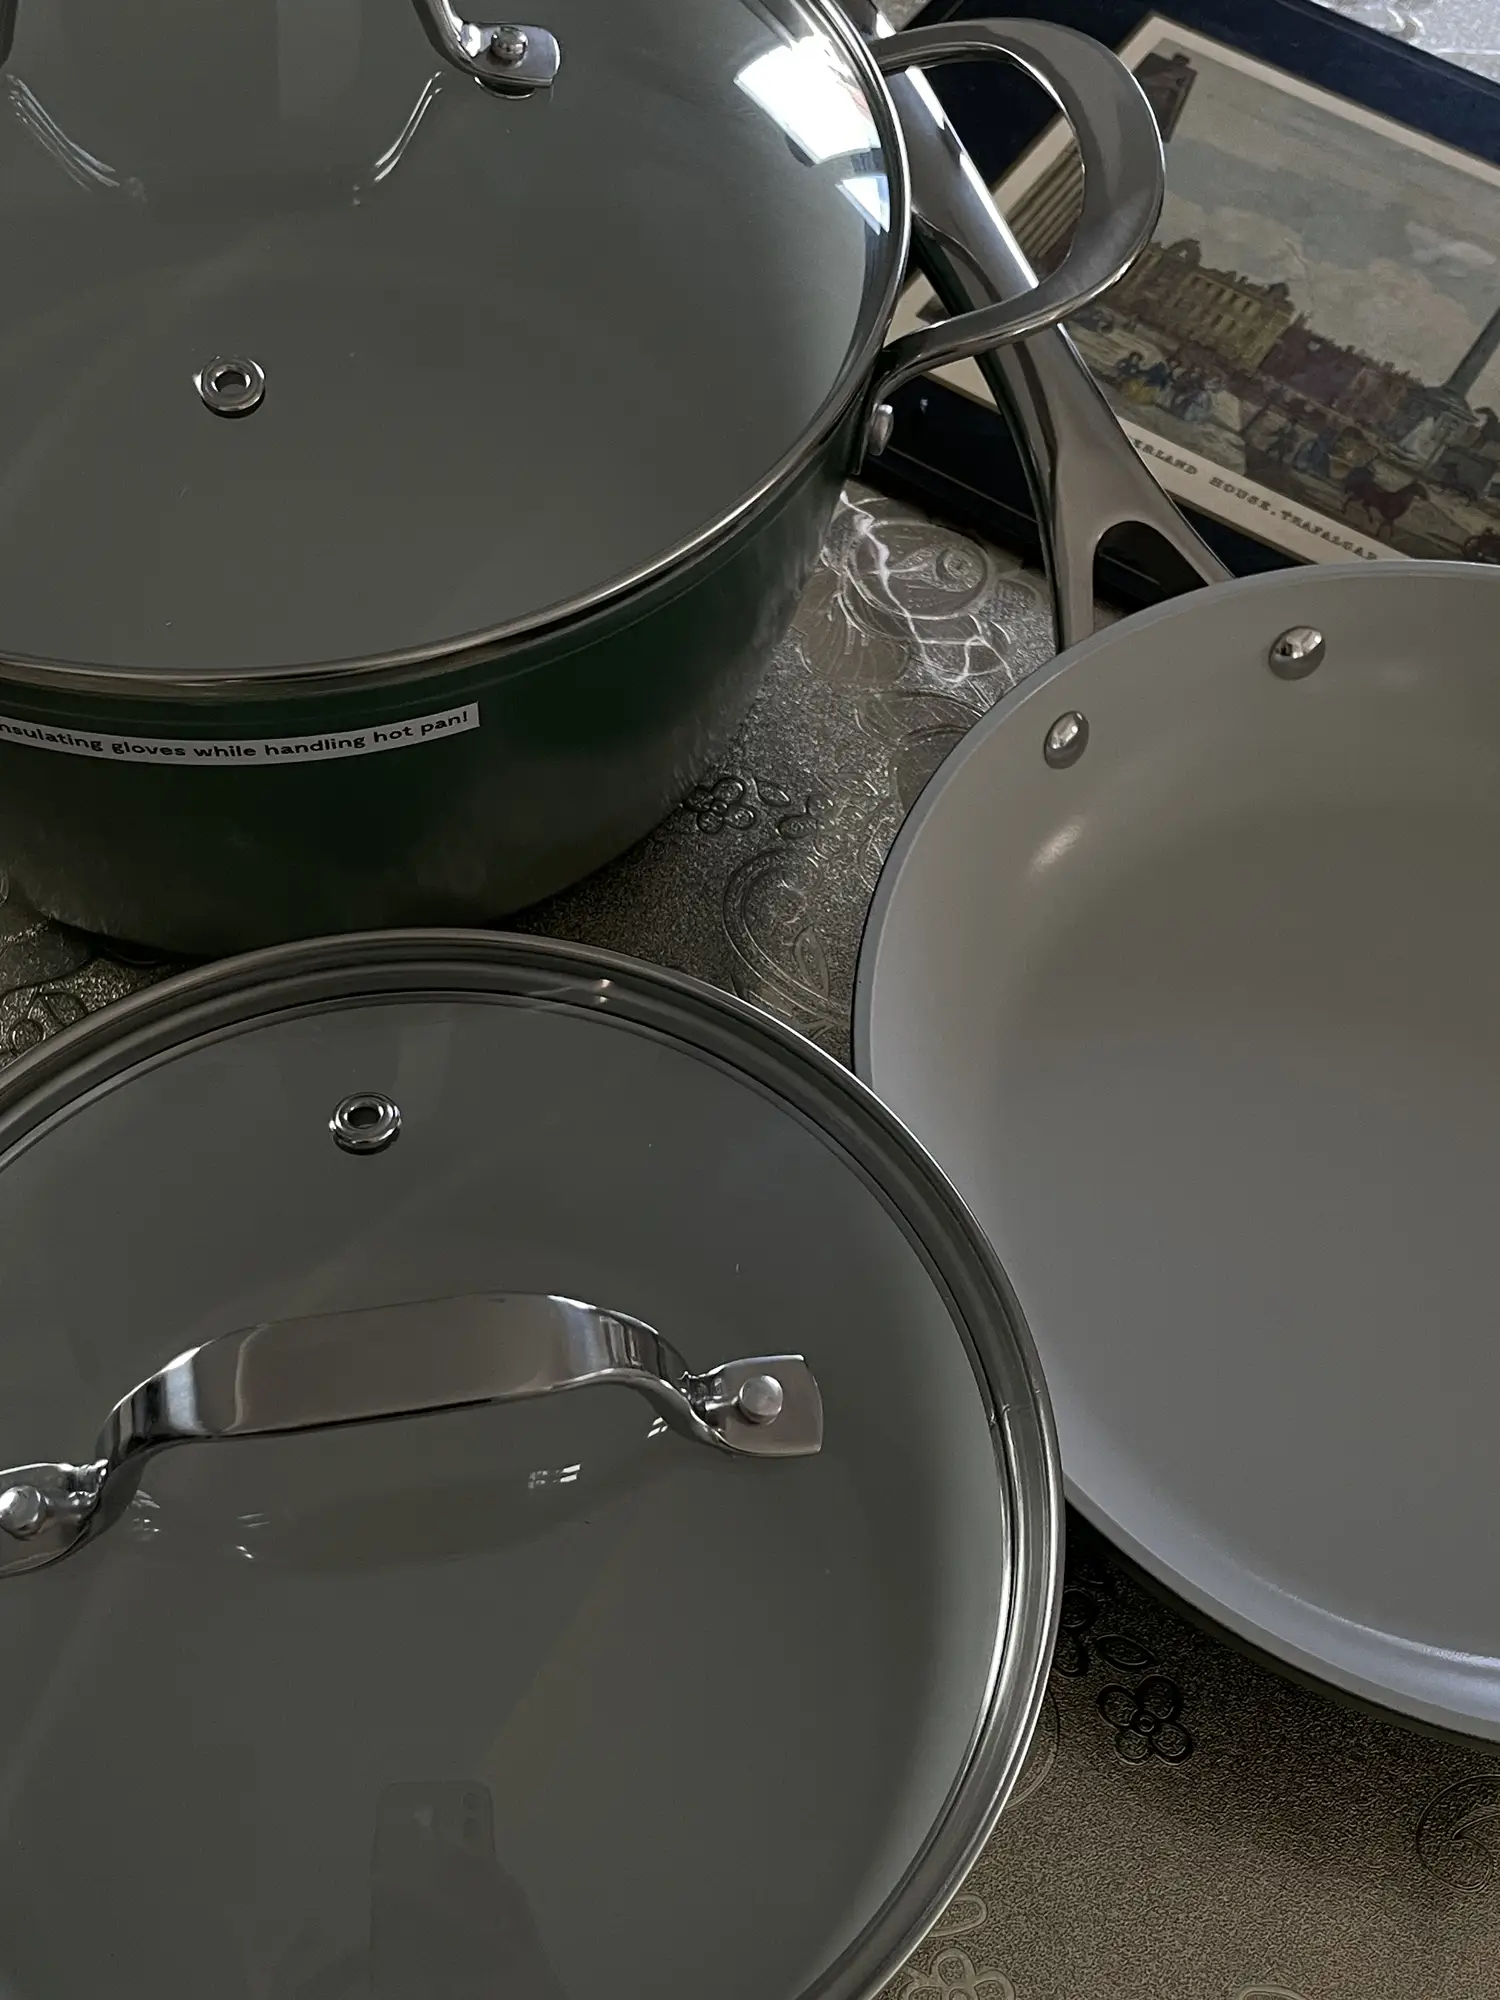 Deane And White Cookware Reviews - Only Facts! - NonToxic Life